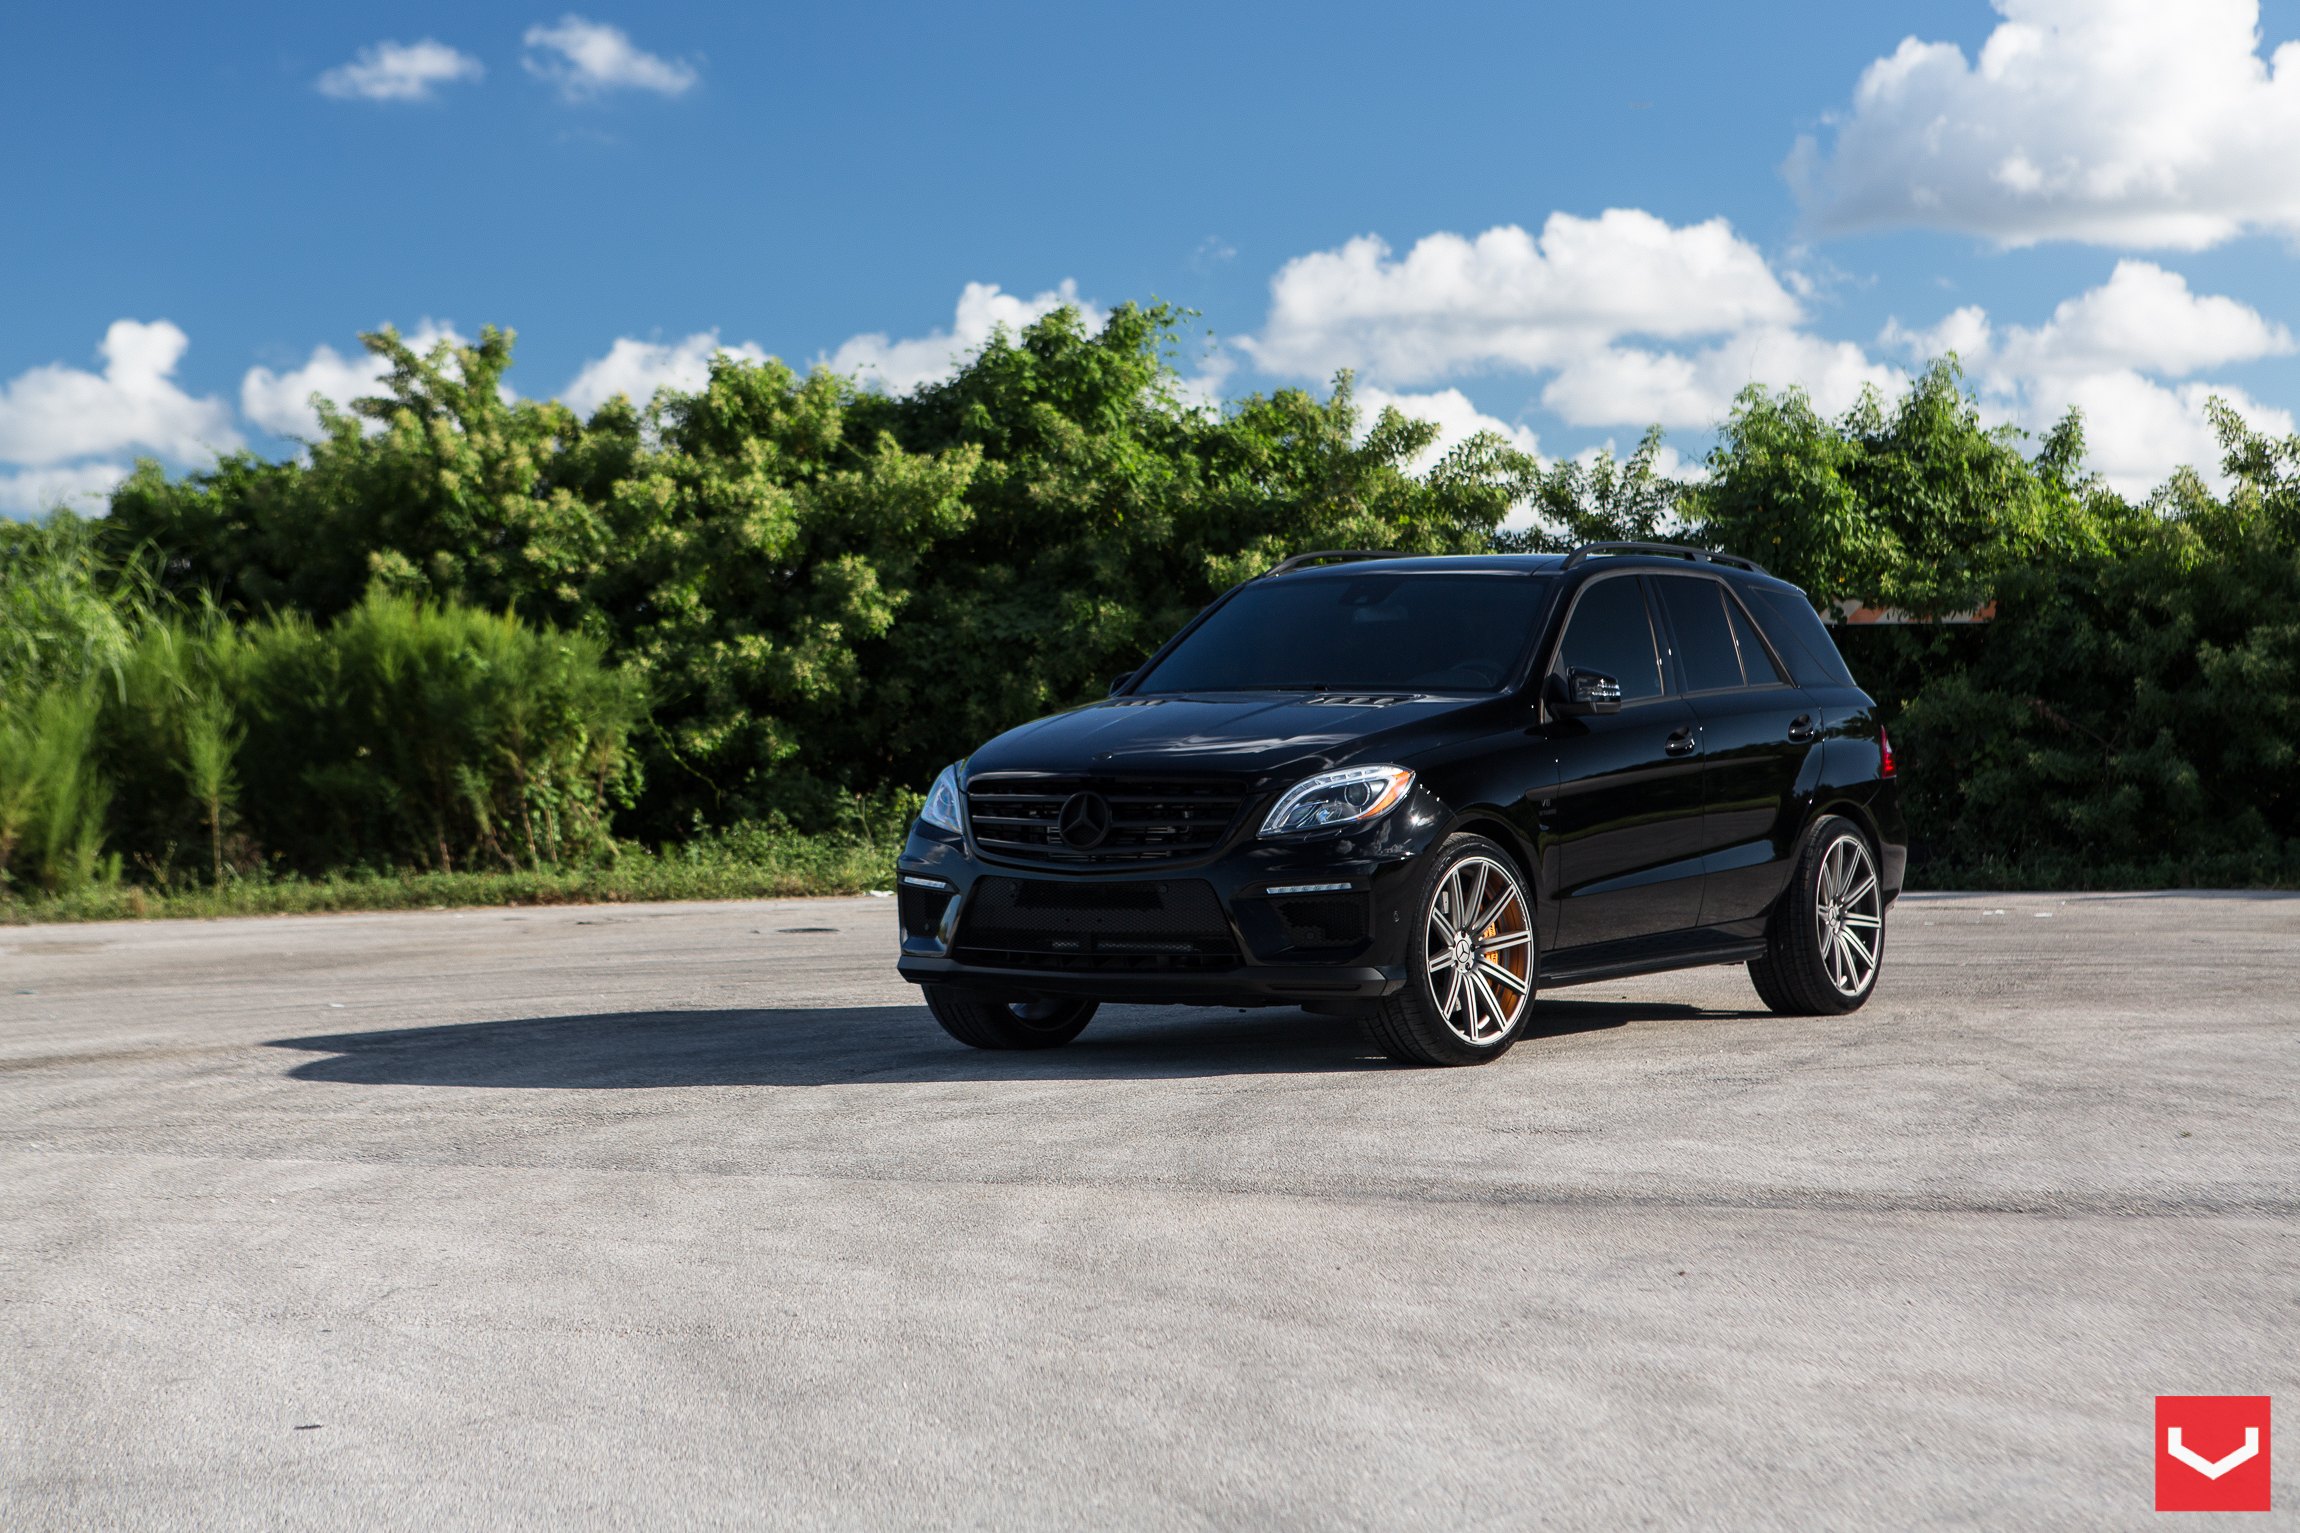 Mercedes M Class with Blacked Out Custom Grille - Photo by Vossen